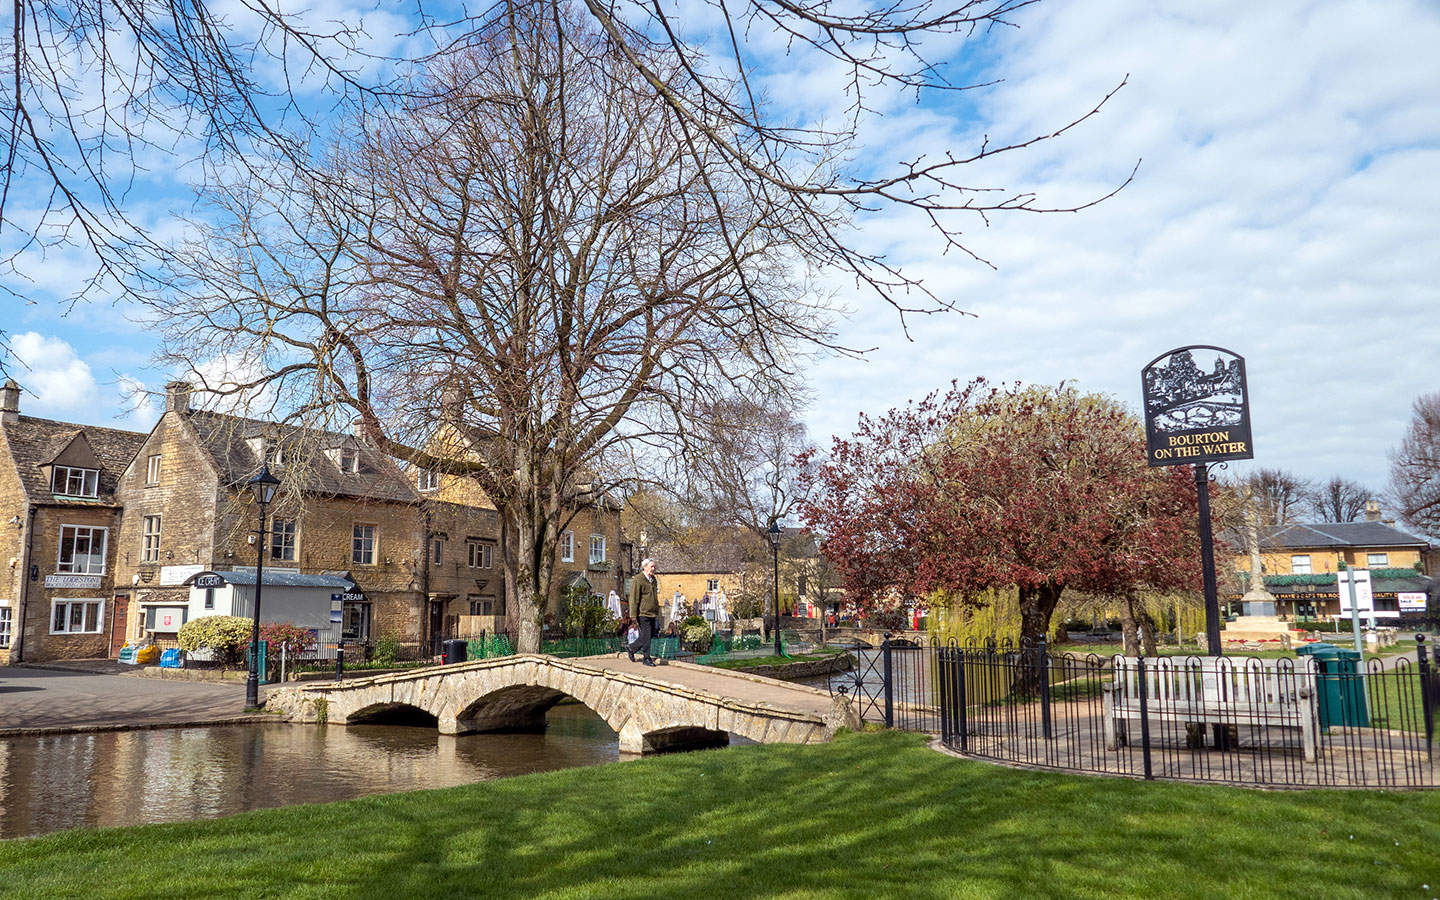 The River Windrush in Bourton-on-the-Water